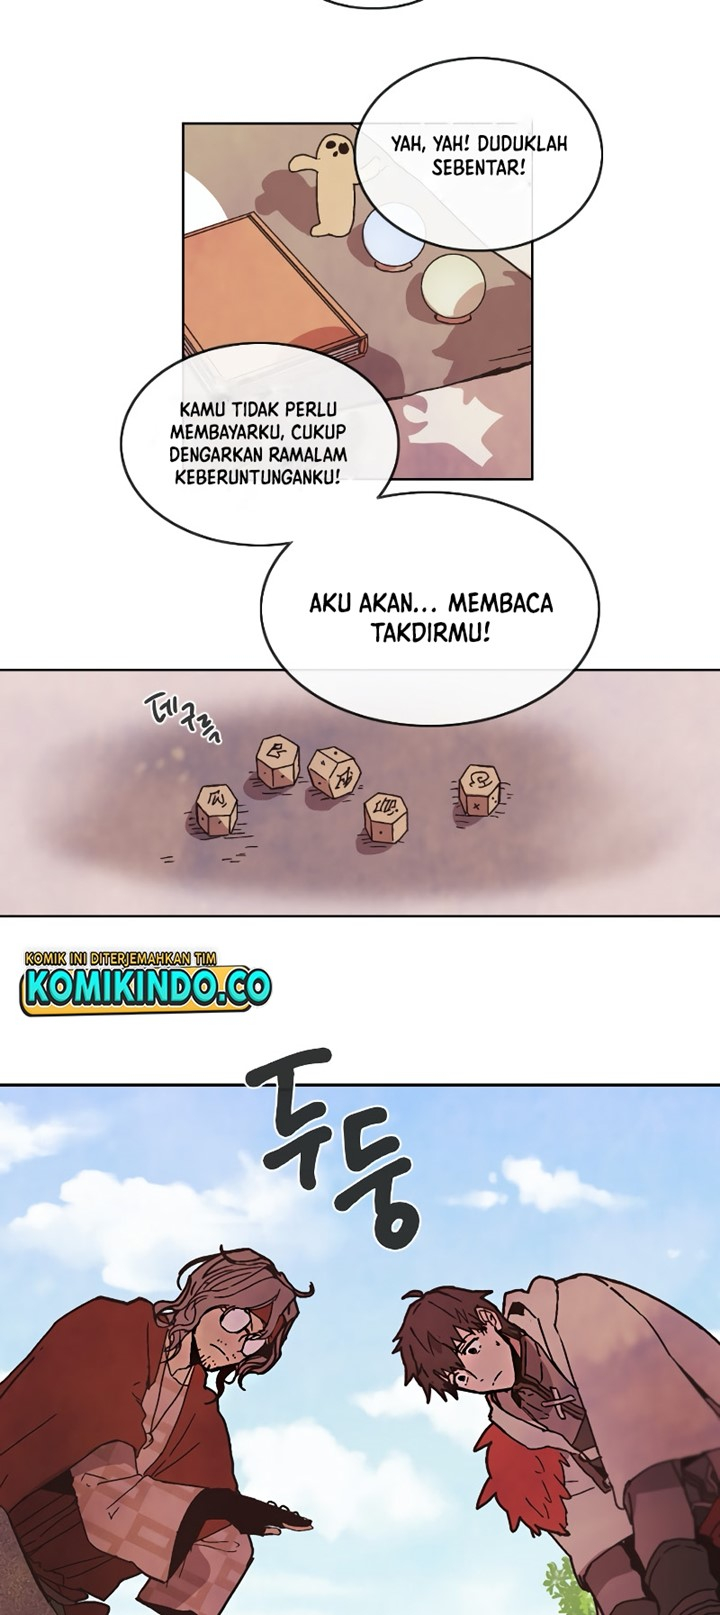 Miracle Hero! Chapter 3